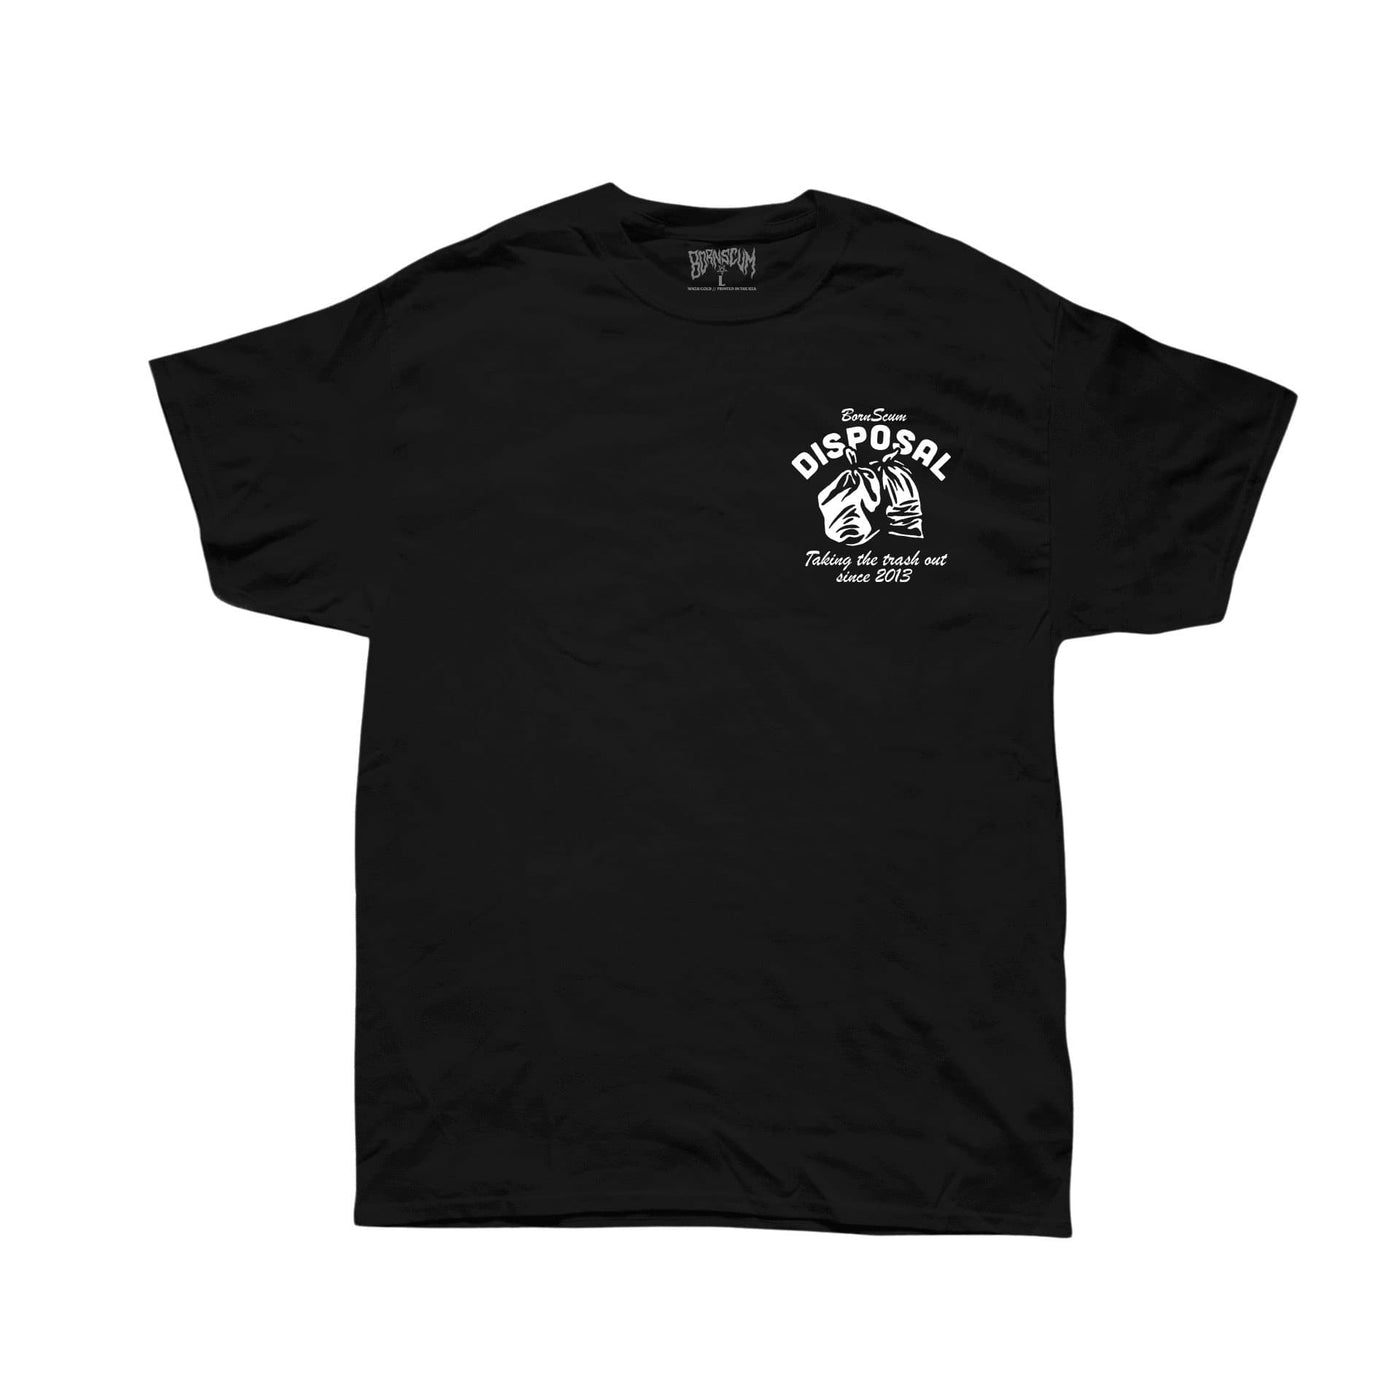 TAKING OUT THE TRASH T-SHIRT - Born Scum Clothing Co